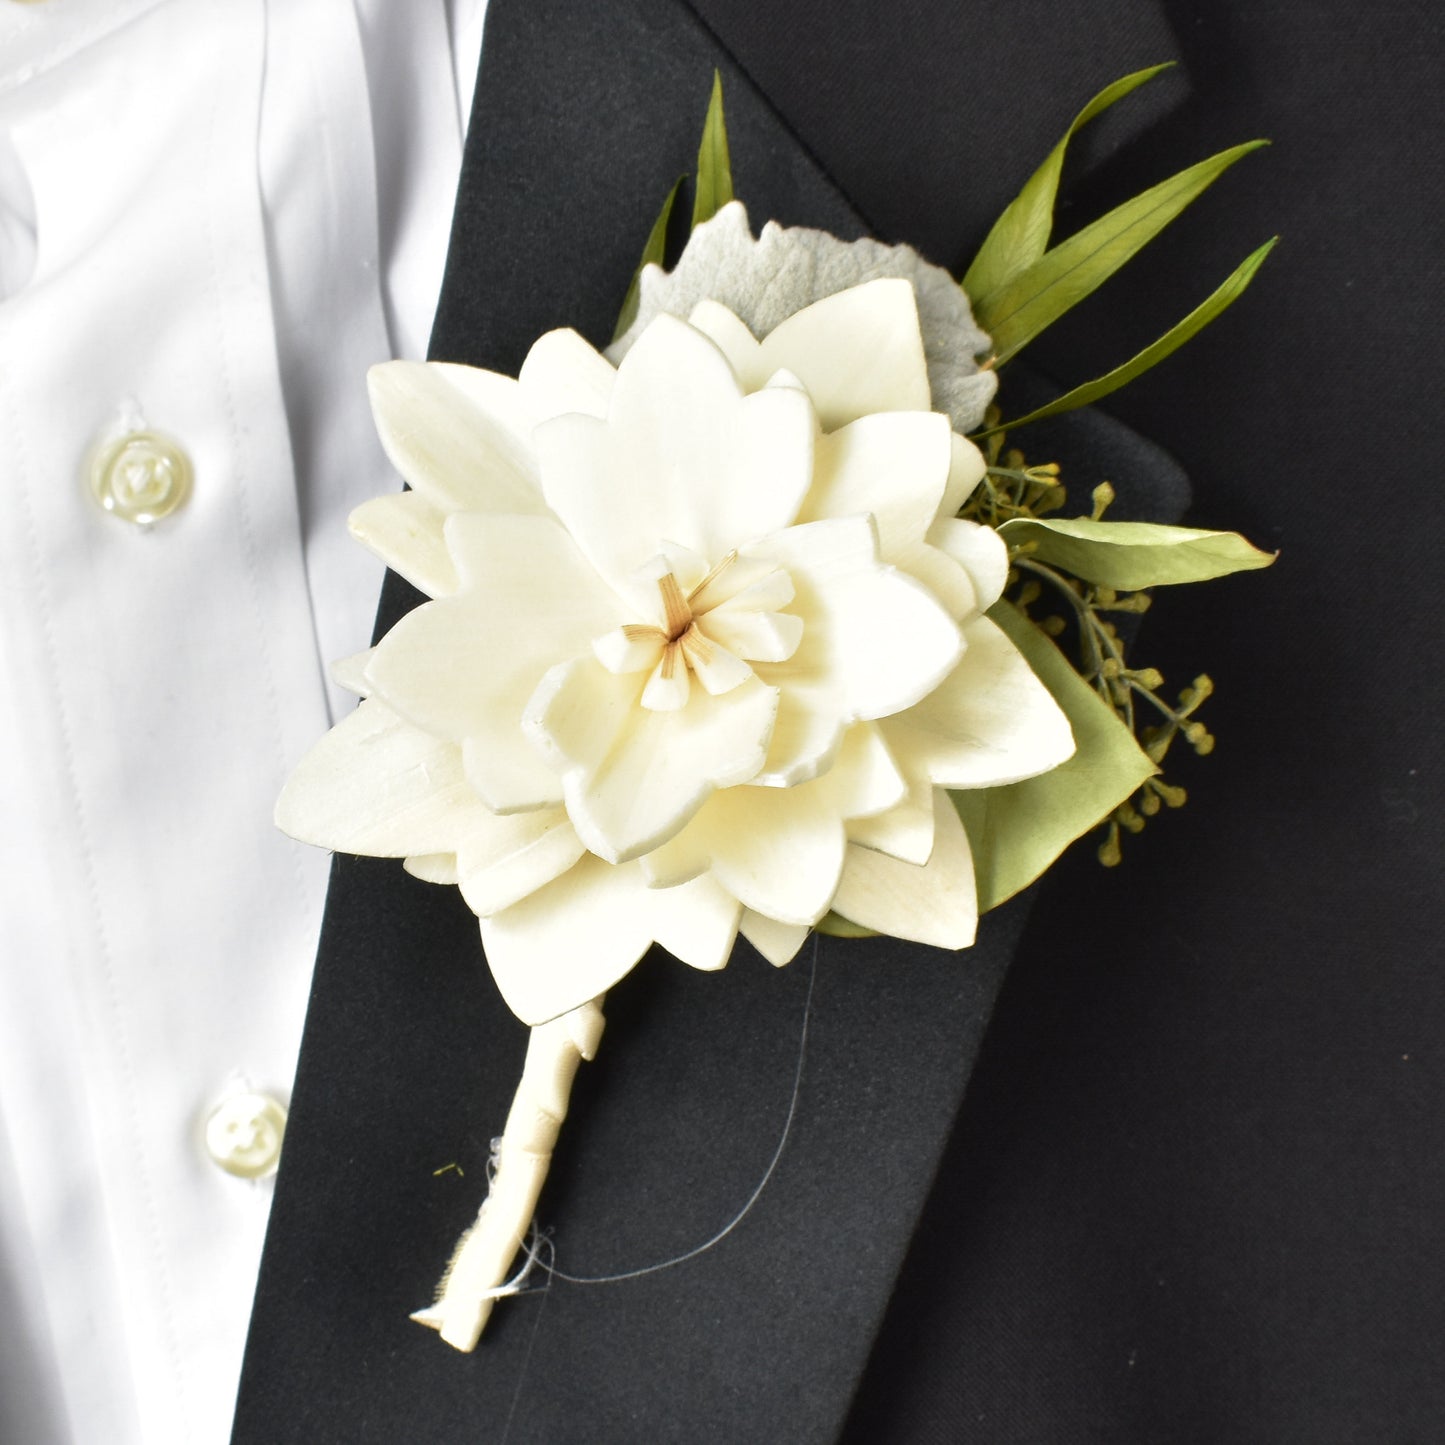 Tuscan Charm Sola Flower Boutonniere